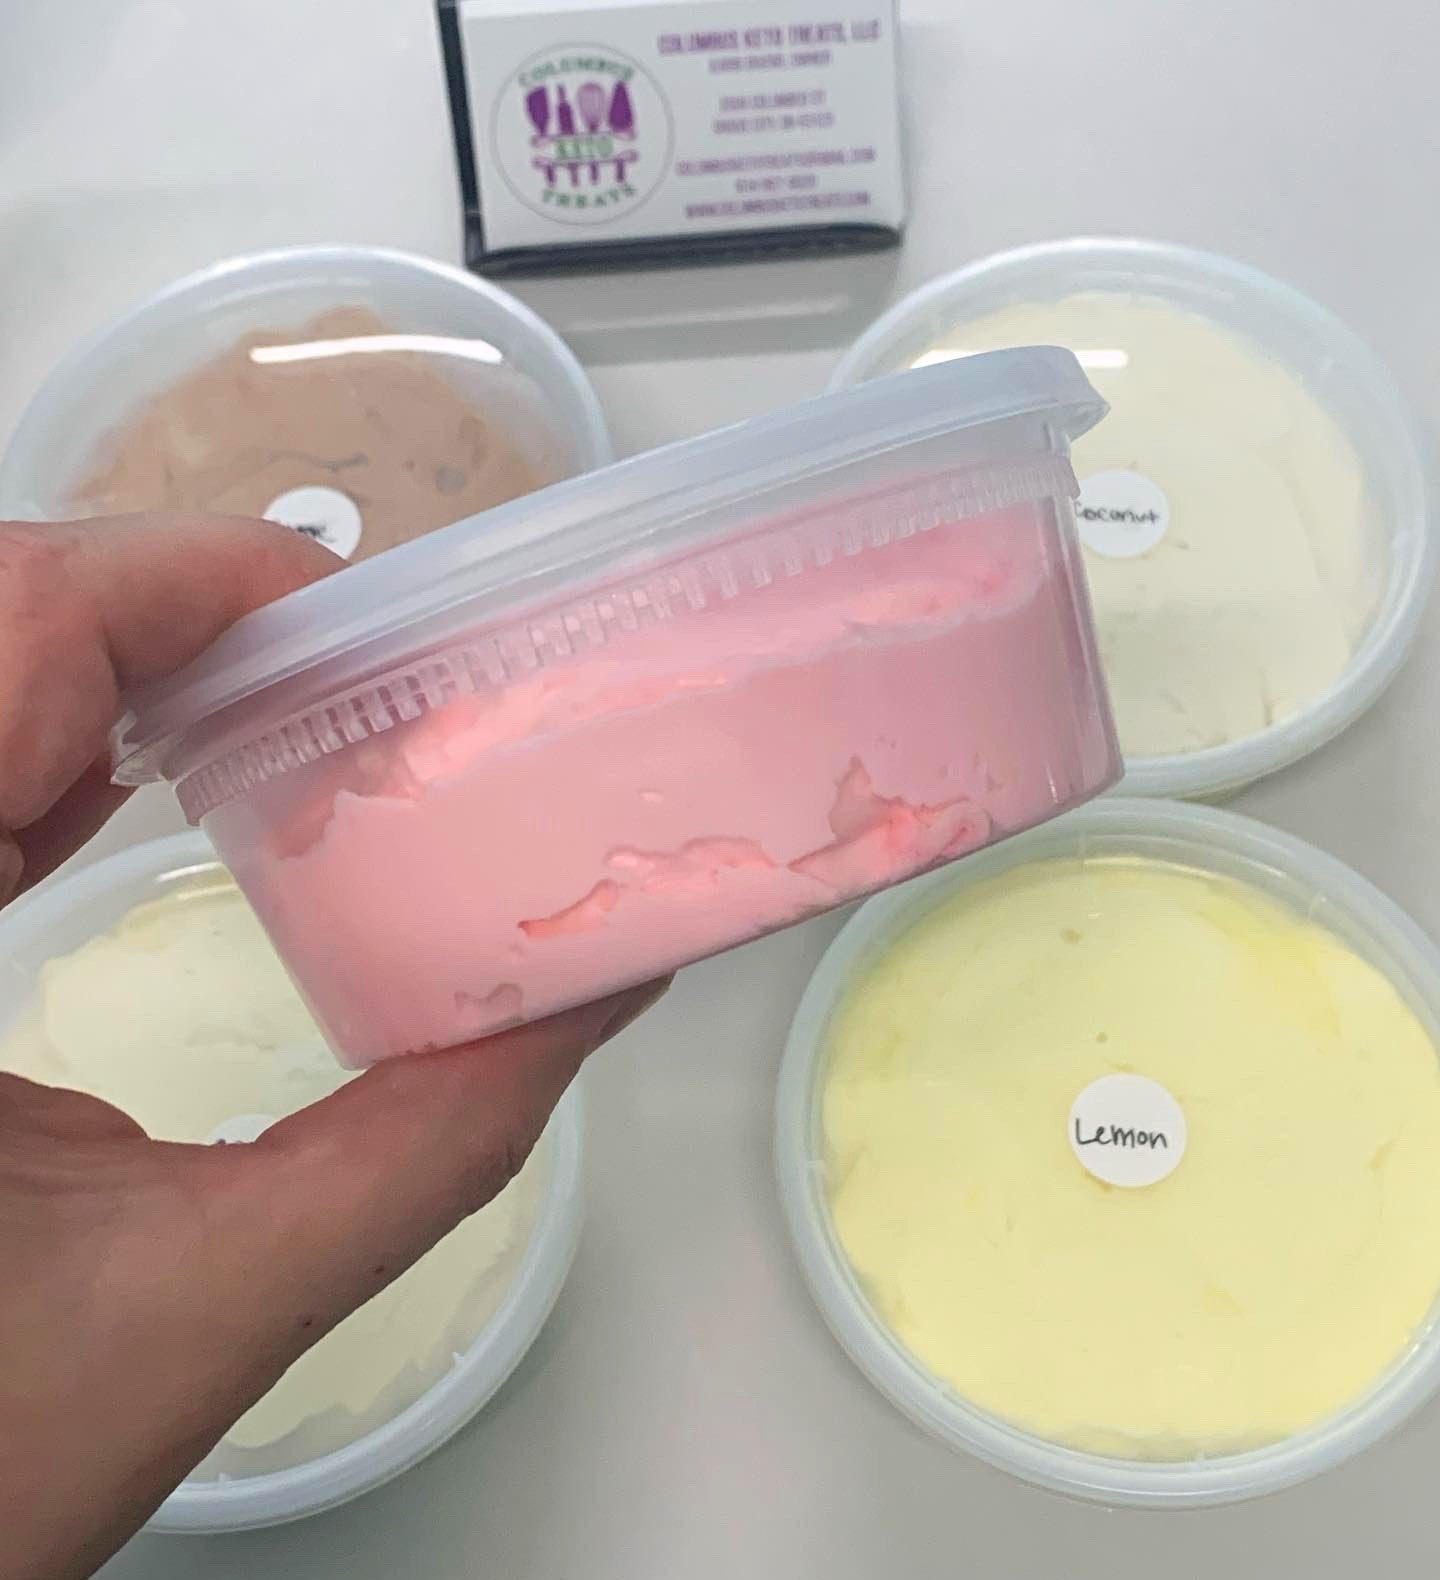 Cheesecake Mousse Fat Bomb, 0.5g carbs per serving